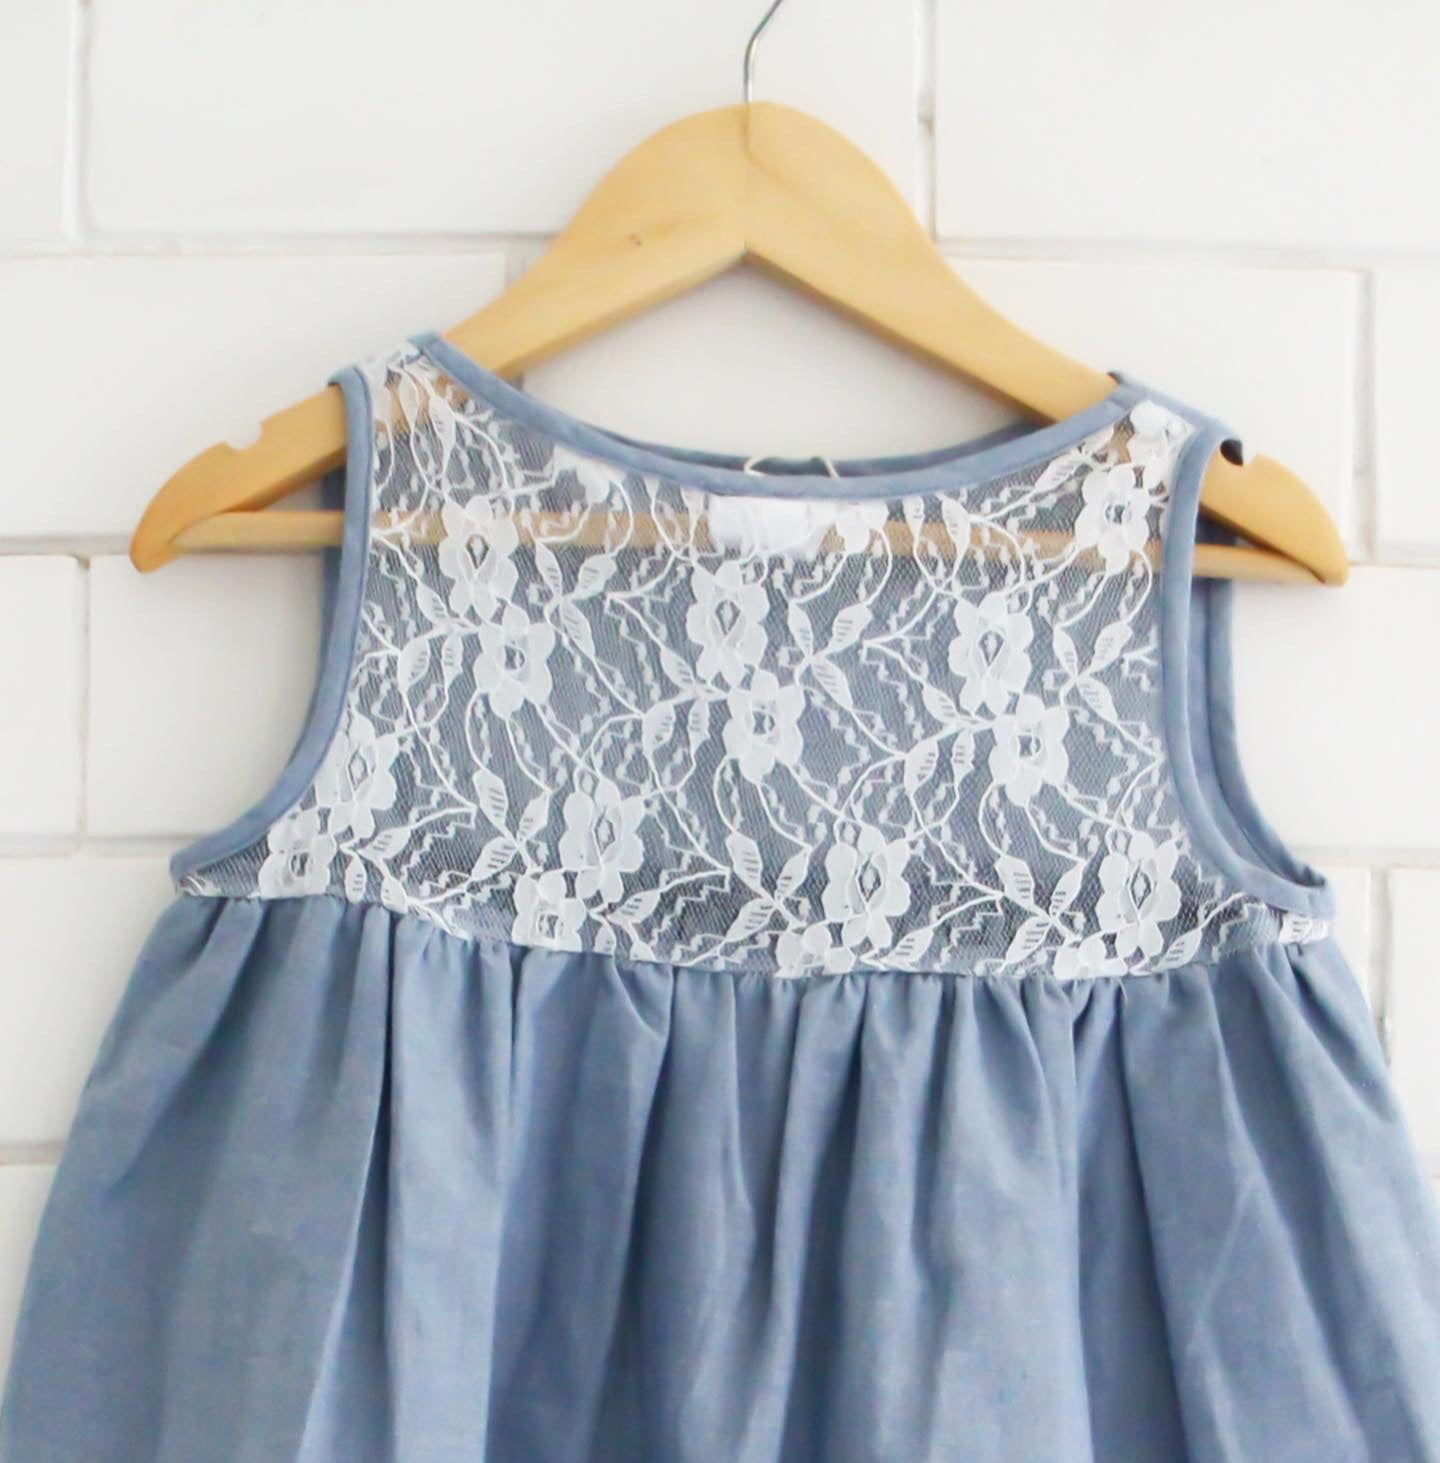 Blue Cambric Dress with Net Detail